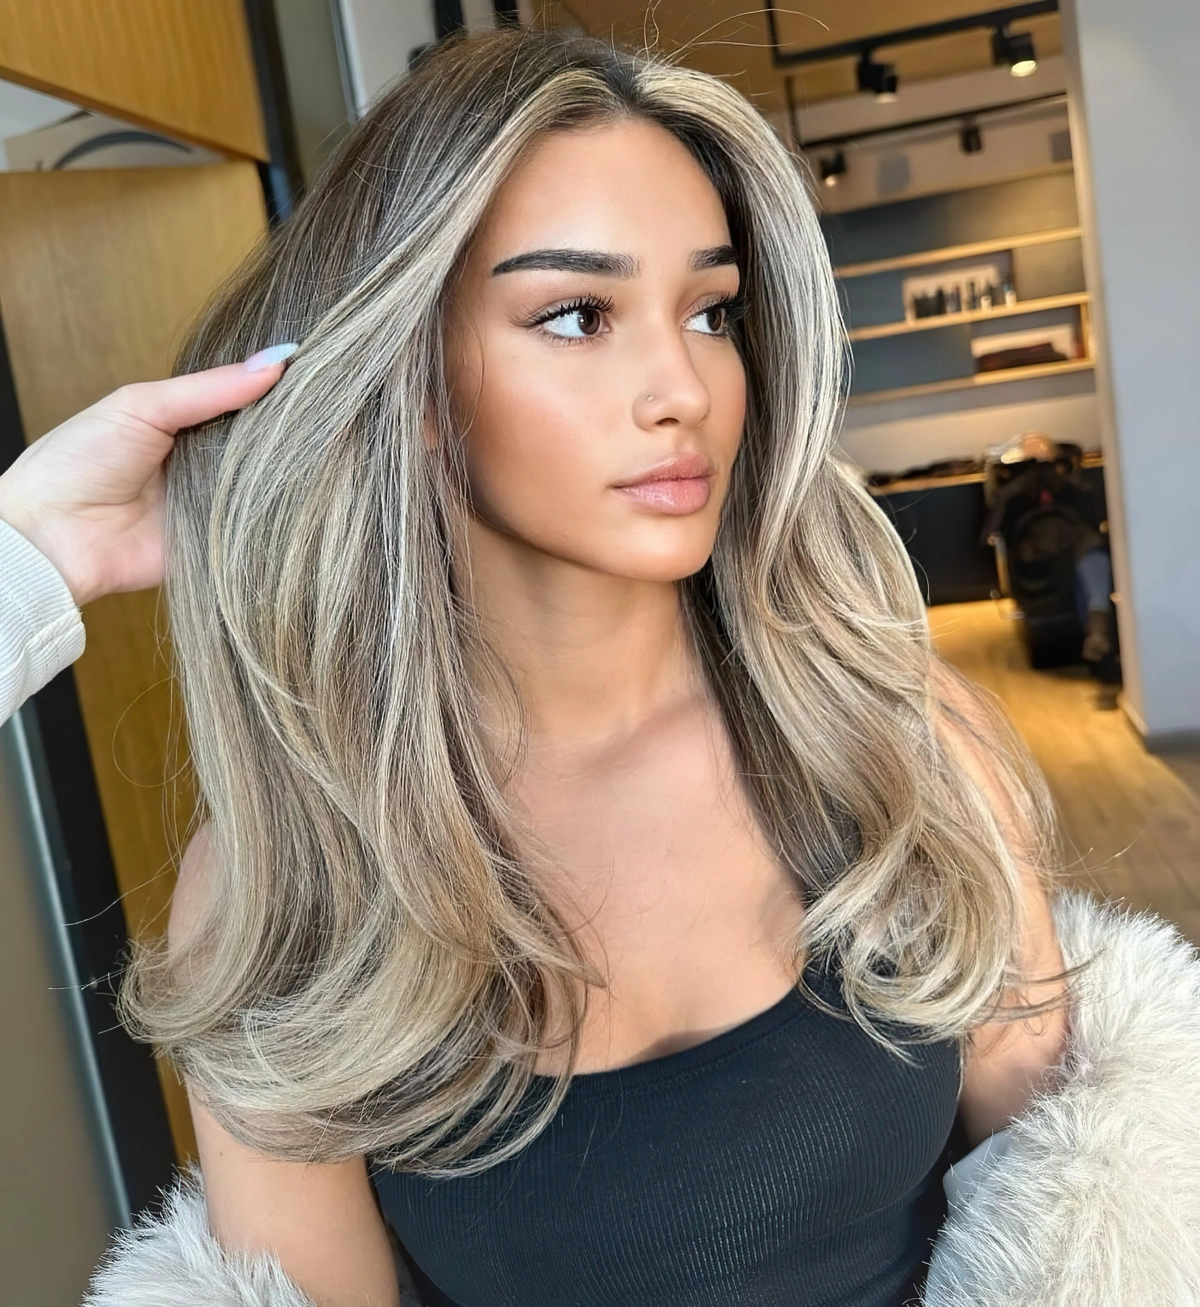 coloration meches blond cendre cheveux chatain fonces maquillage nude